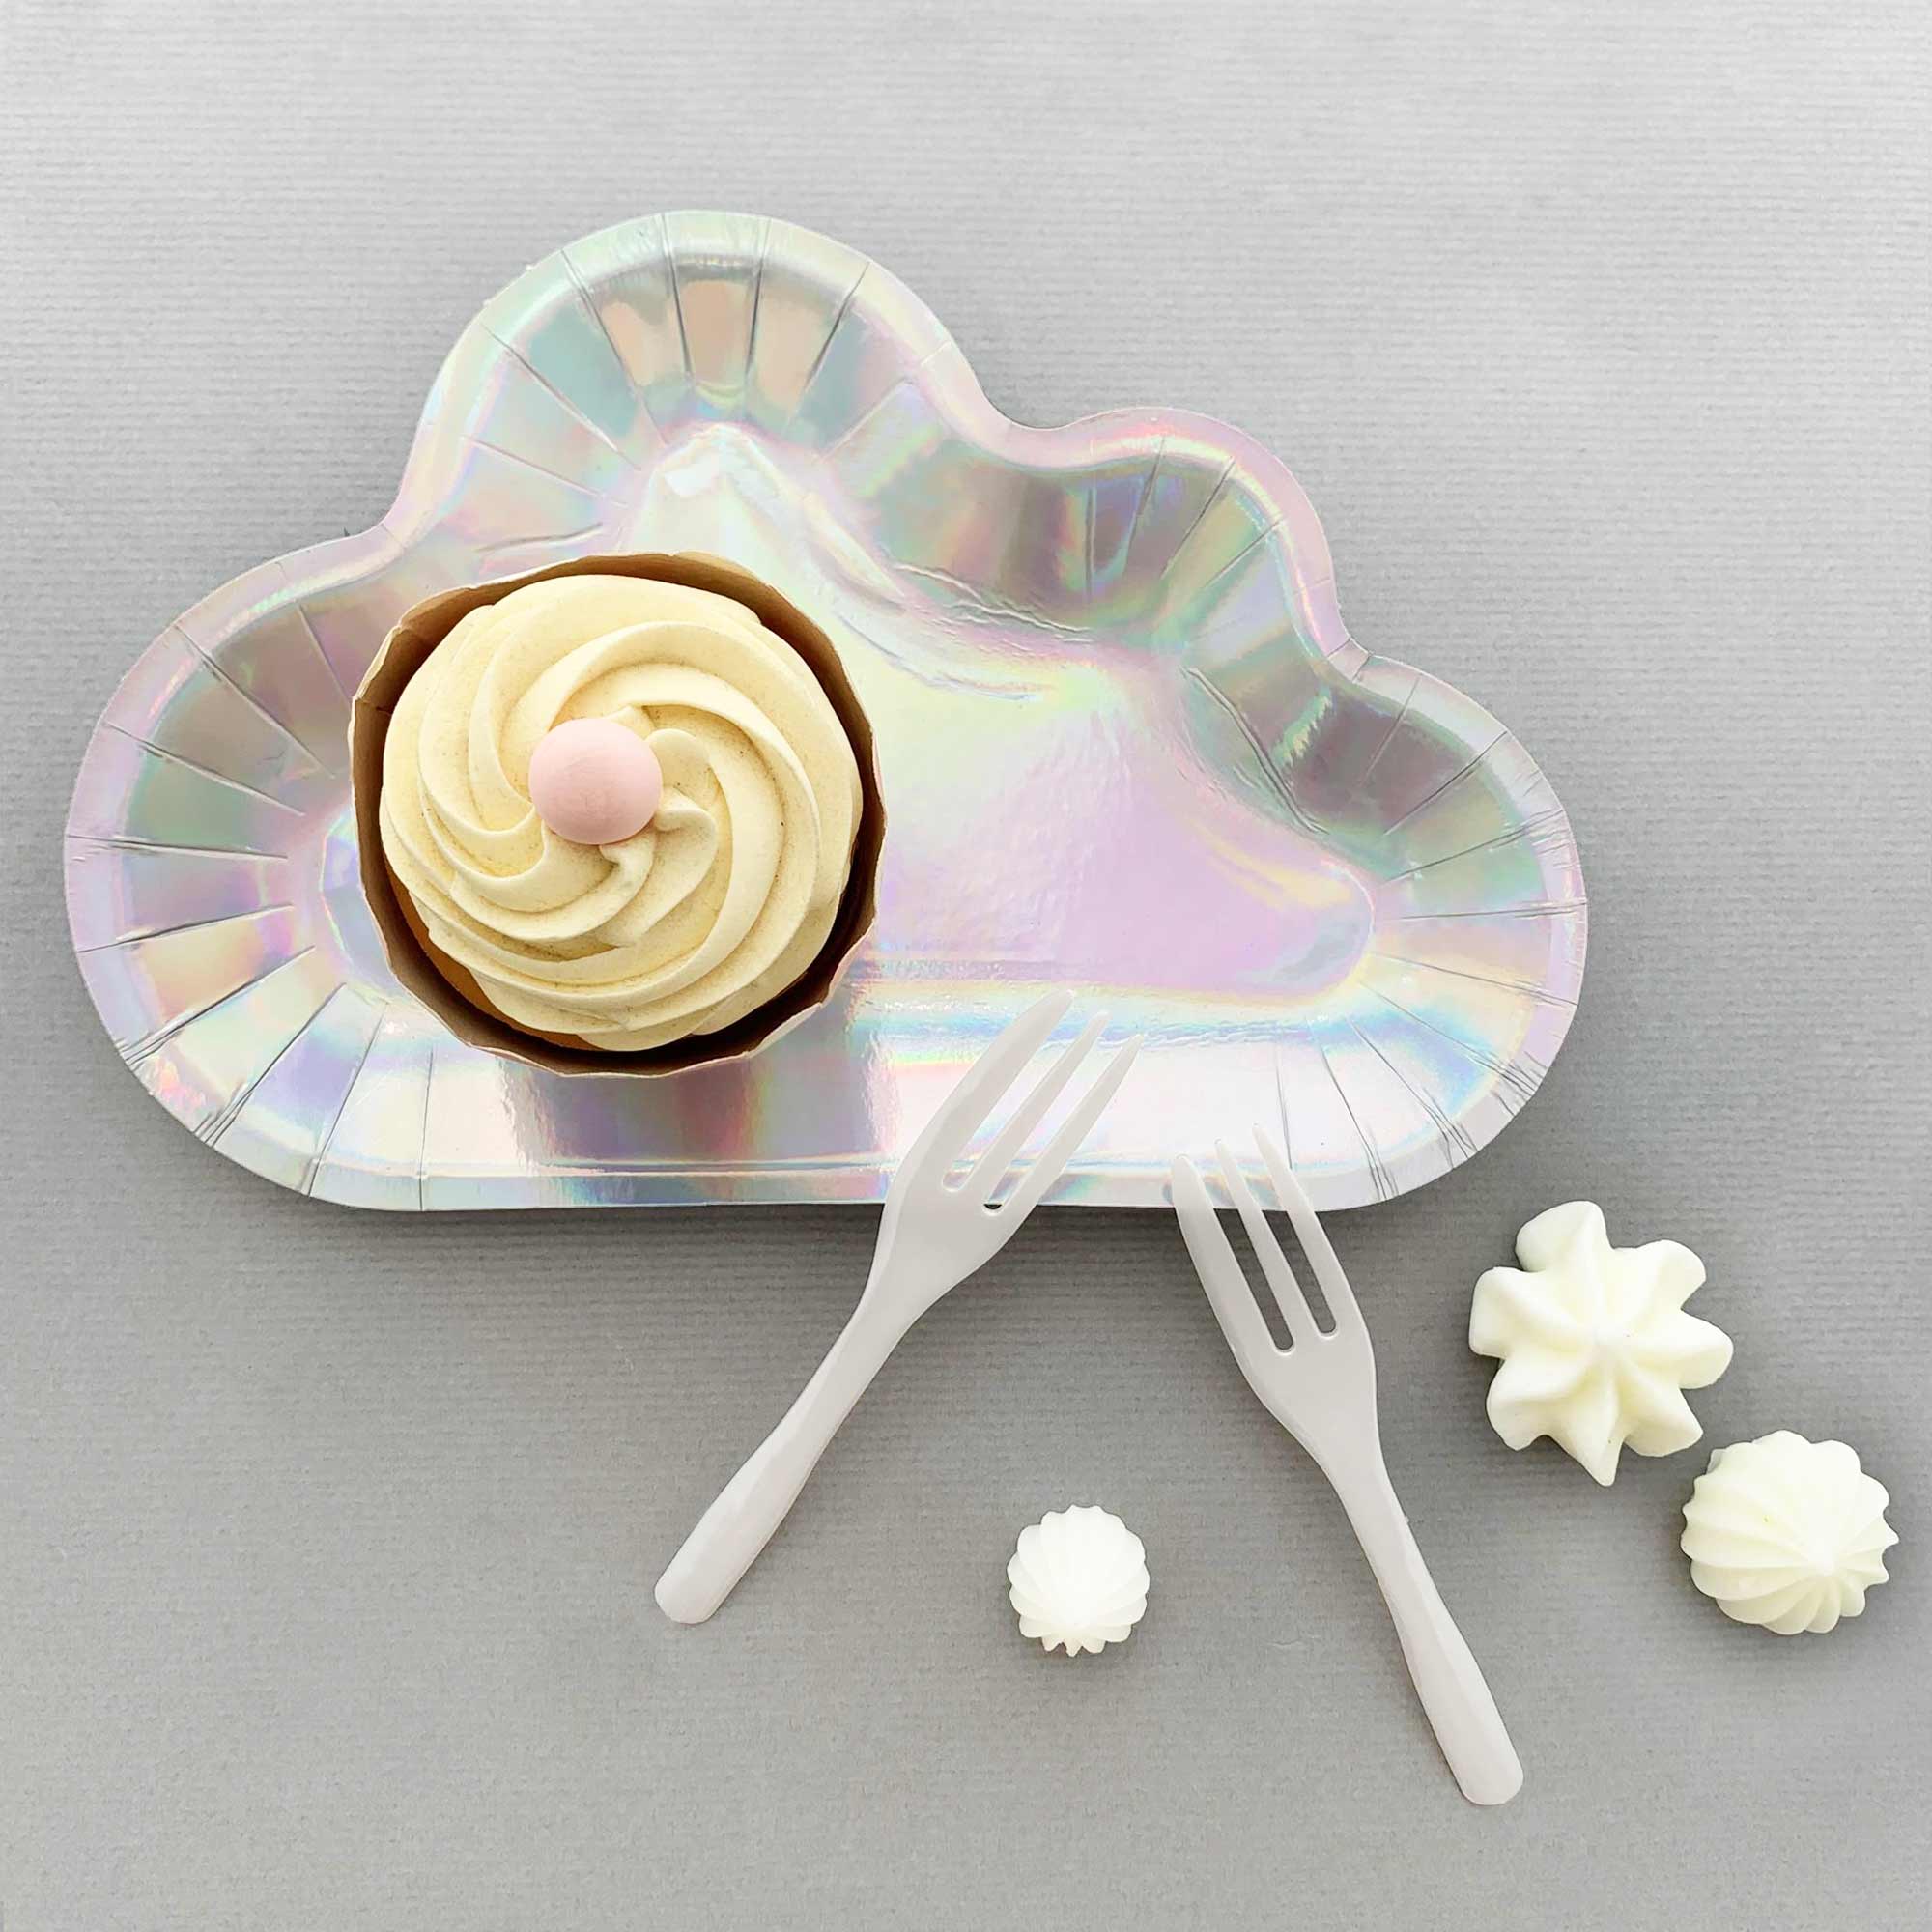 The sparkling cloud-shaped cake plate and fork set is perfect for a sky-themed birthday party. Illuminate your dining table with the sparkling cloud plate and add a touch of radiance to your celebration!